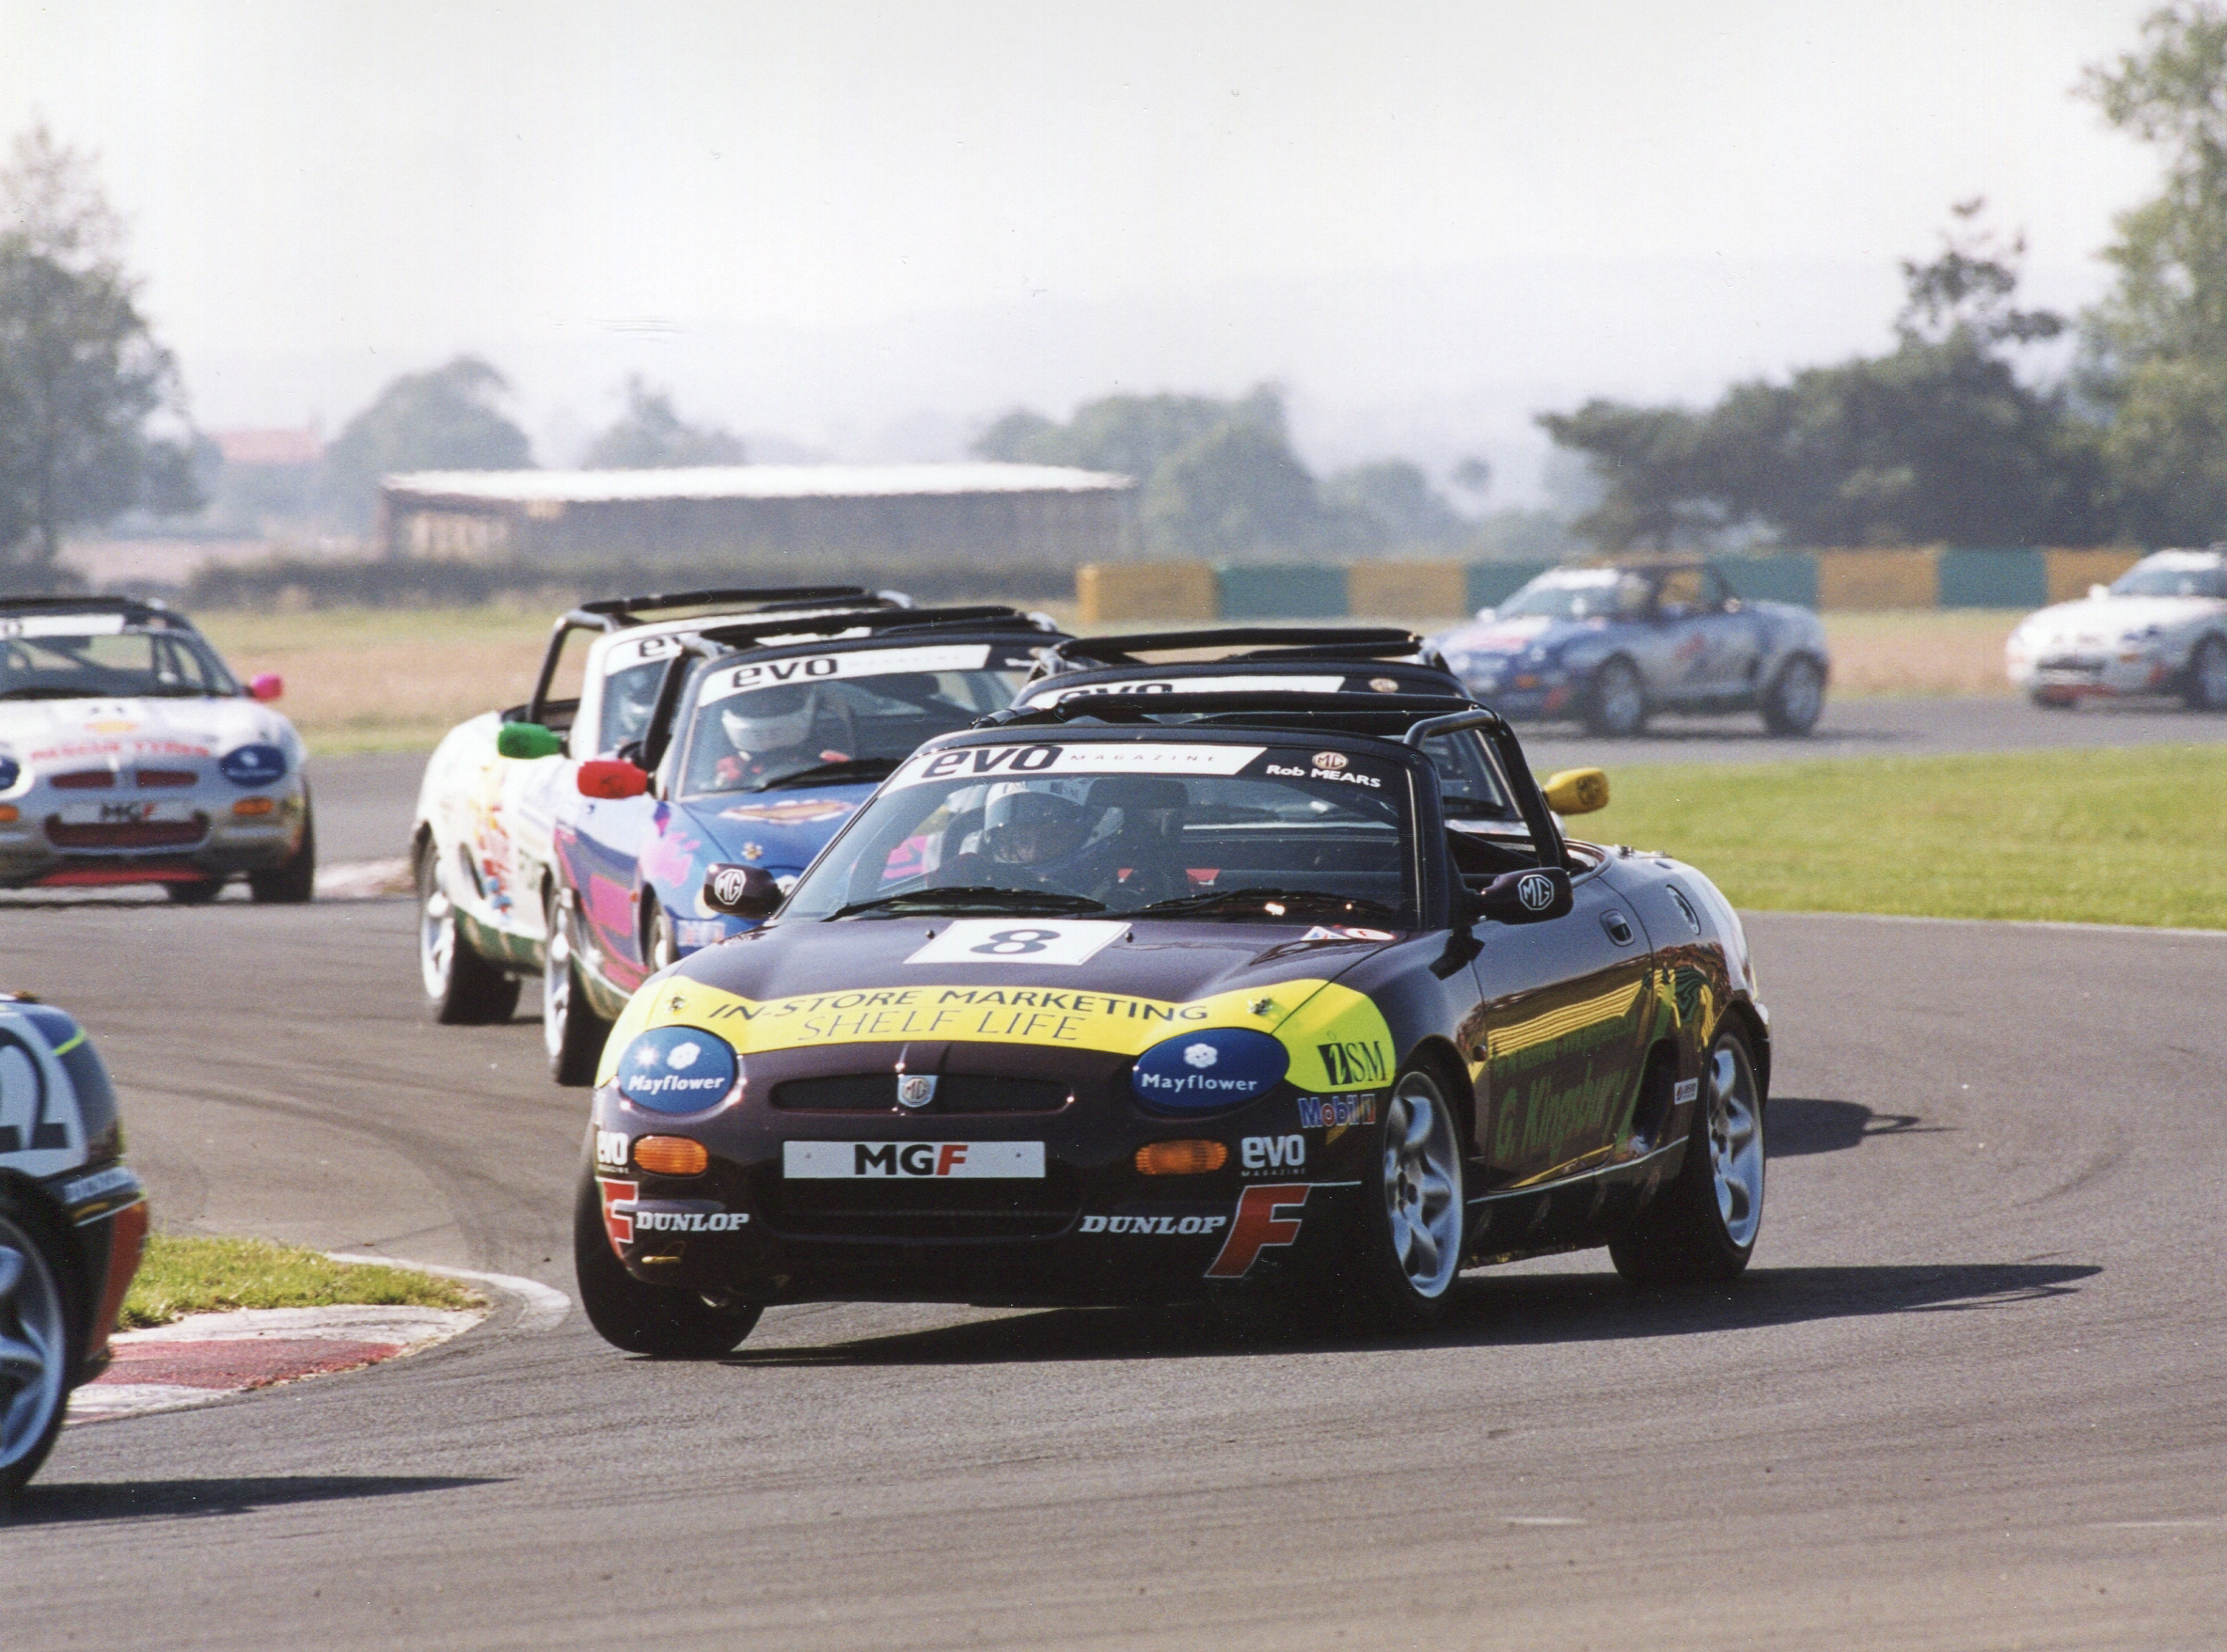 th Anniversary Of The Mgf Cup Motorsport